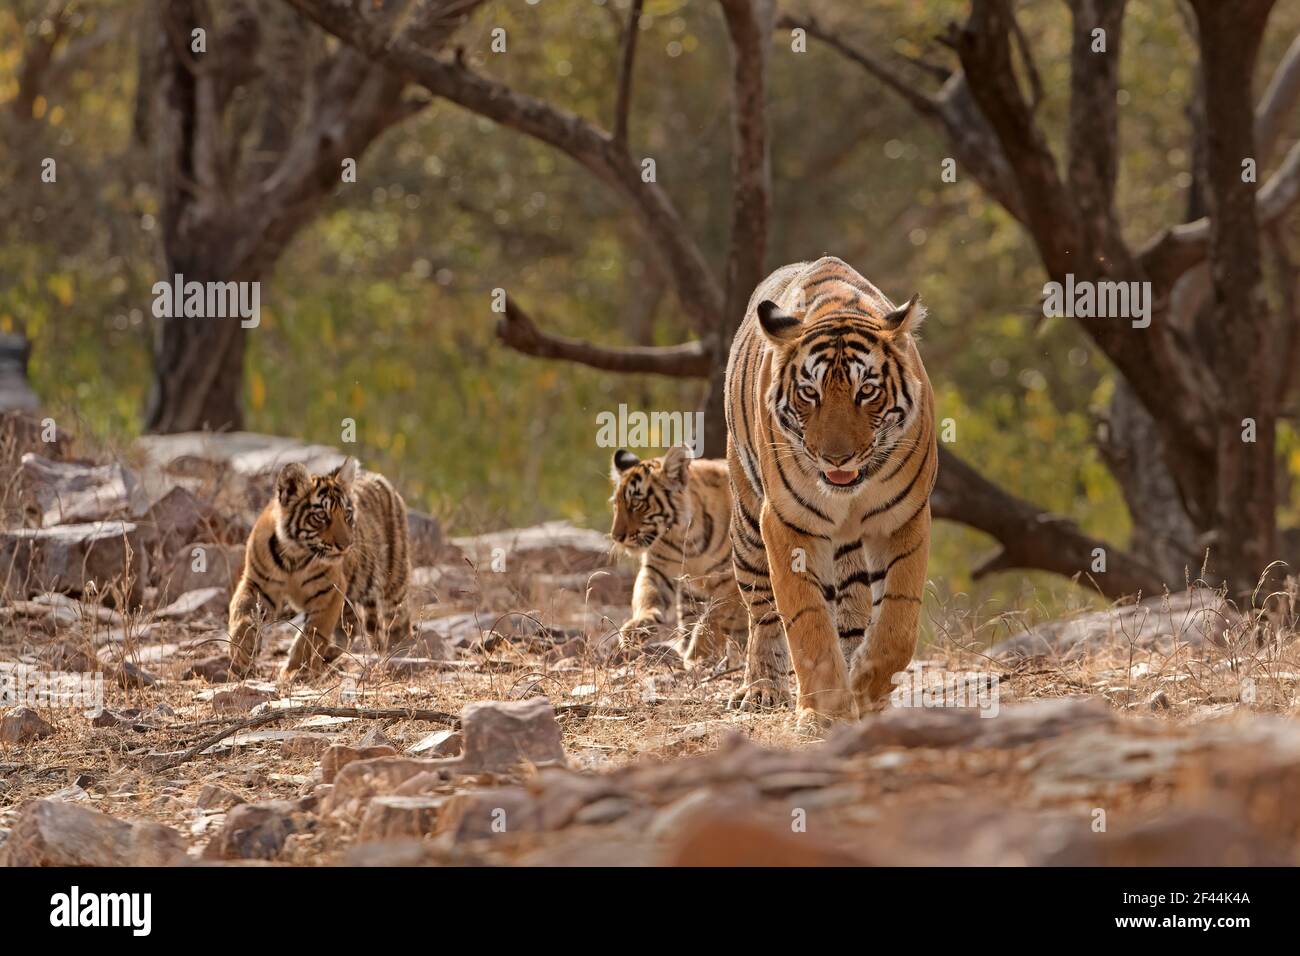 Royal Bengal tigress called Arrowhead, with two small cubs in tow walking in the forests of Ranthambore tiger reserve, India Stock Photo